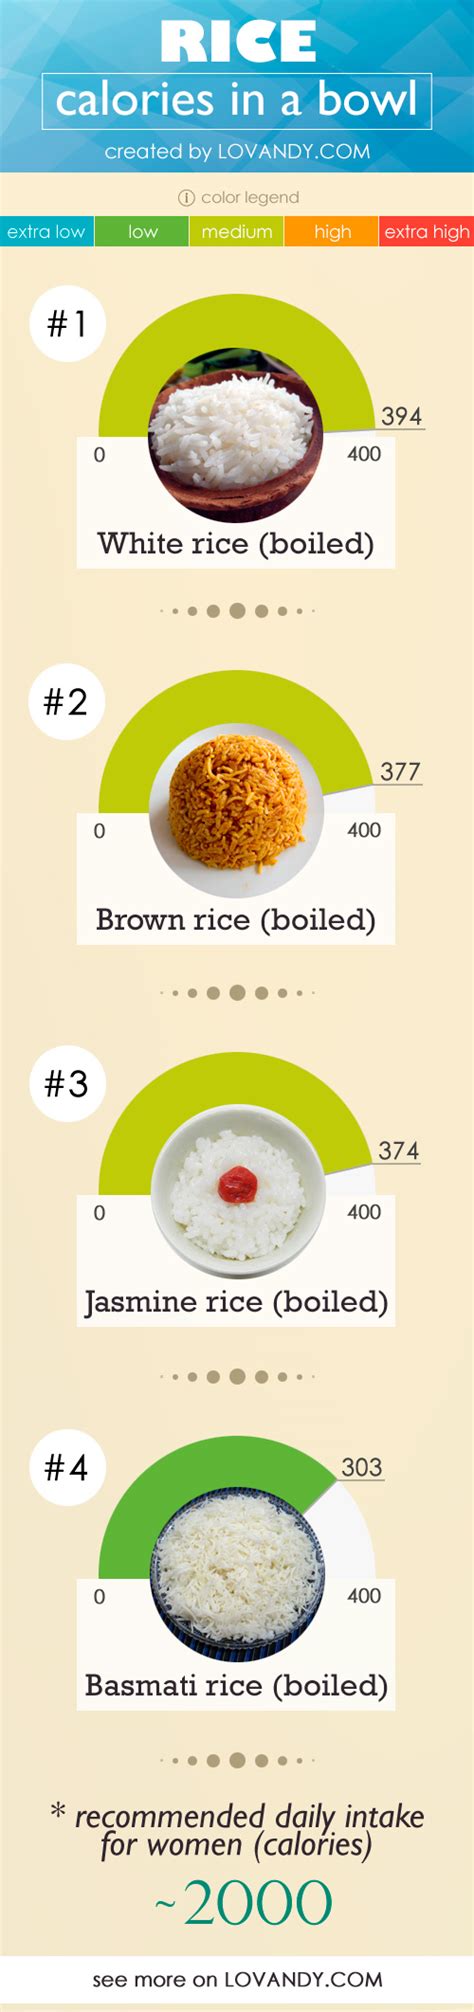 Calories in rice basmati. Calories in Co Op Basmati Rice 500g. Serving size. Energy: 125 calories. Protein: 2.8g: Carbs: 27g: Fat: 0.7g Proportion of total calories contributed by protein, carbs and fat ... We track calories and 7 key nutrients - carbs, sugar, fibre, protein, fat, saturated fat and sodium. 